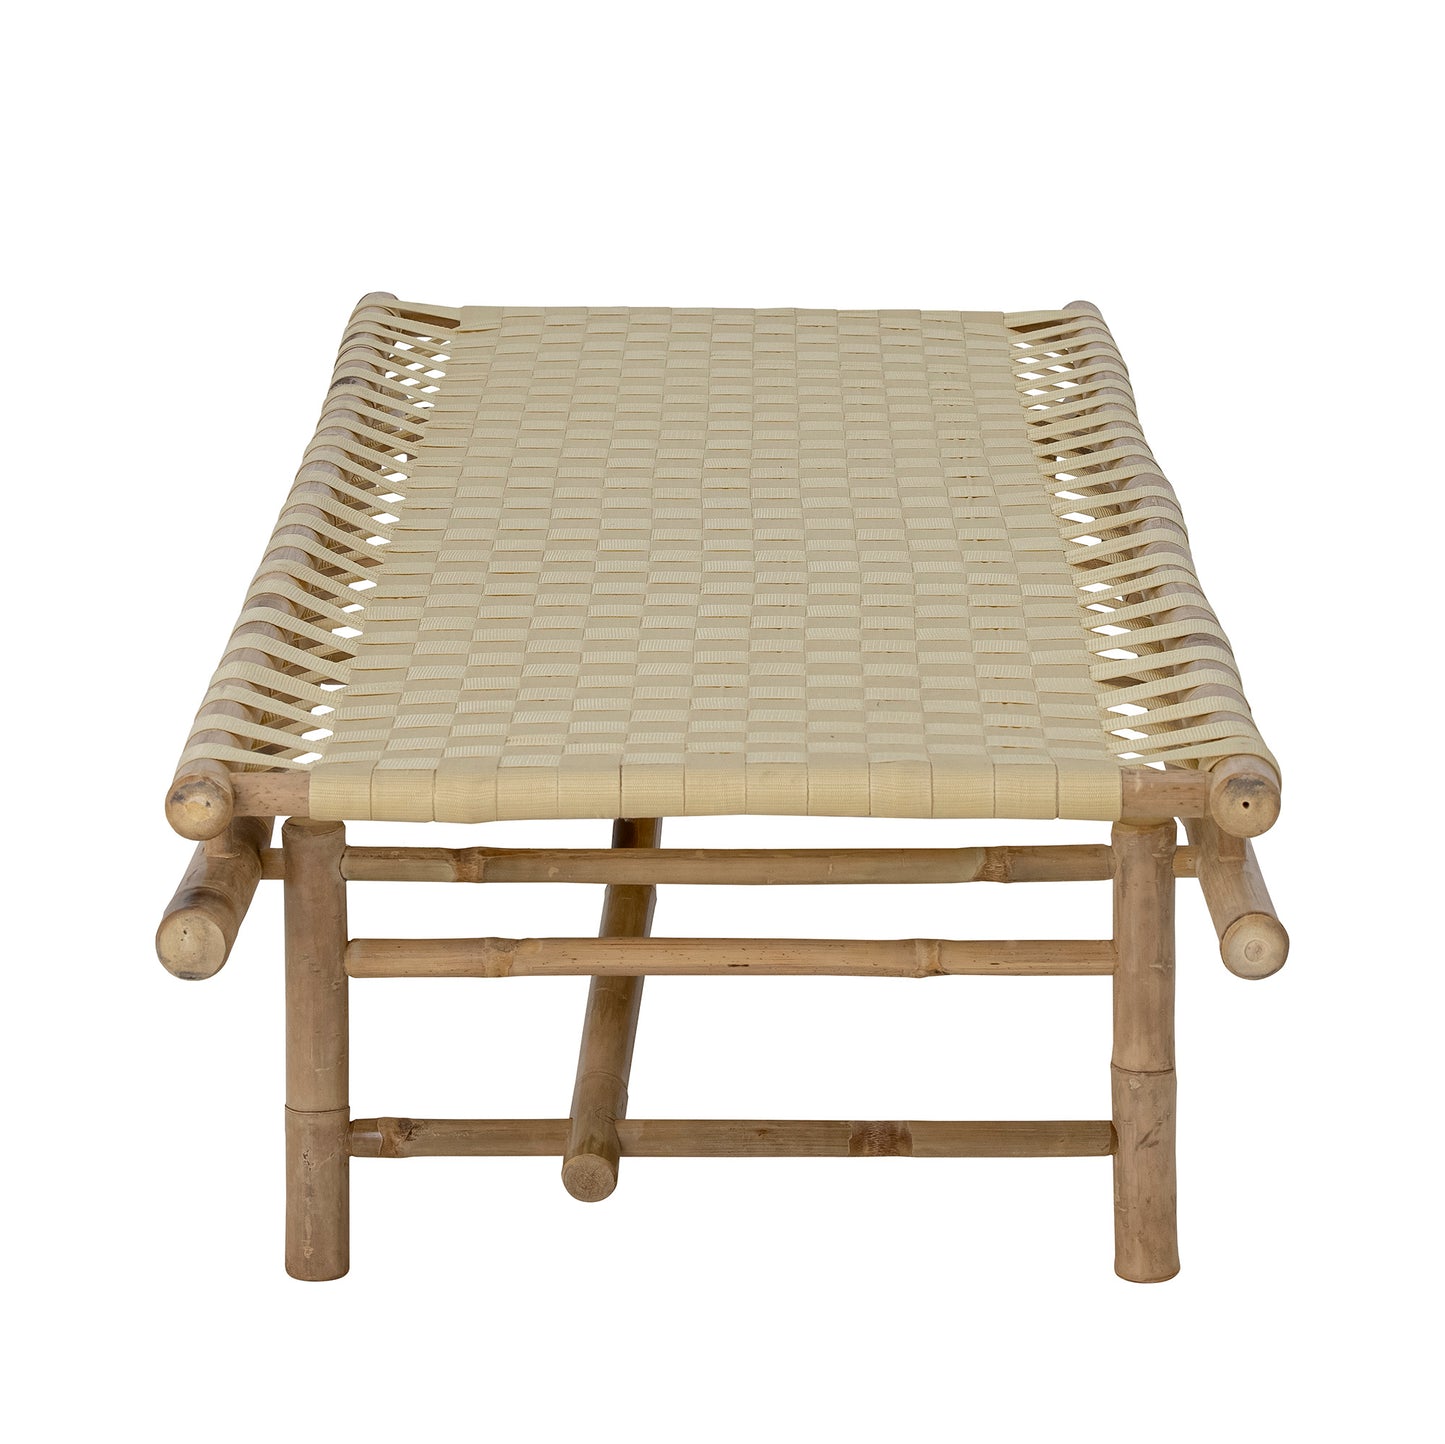 Bloomingville Outdoor Vida Bamboo Daybed in Natural